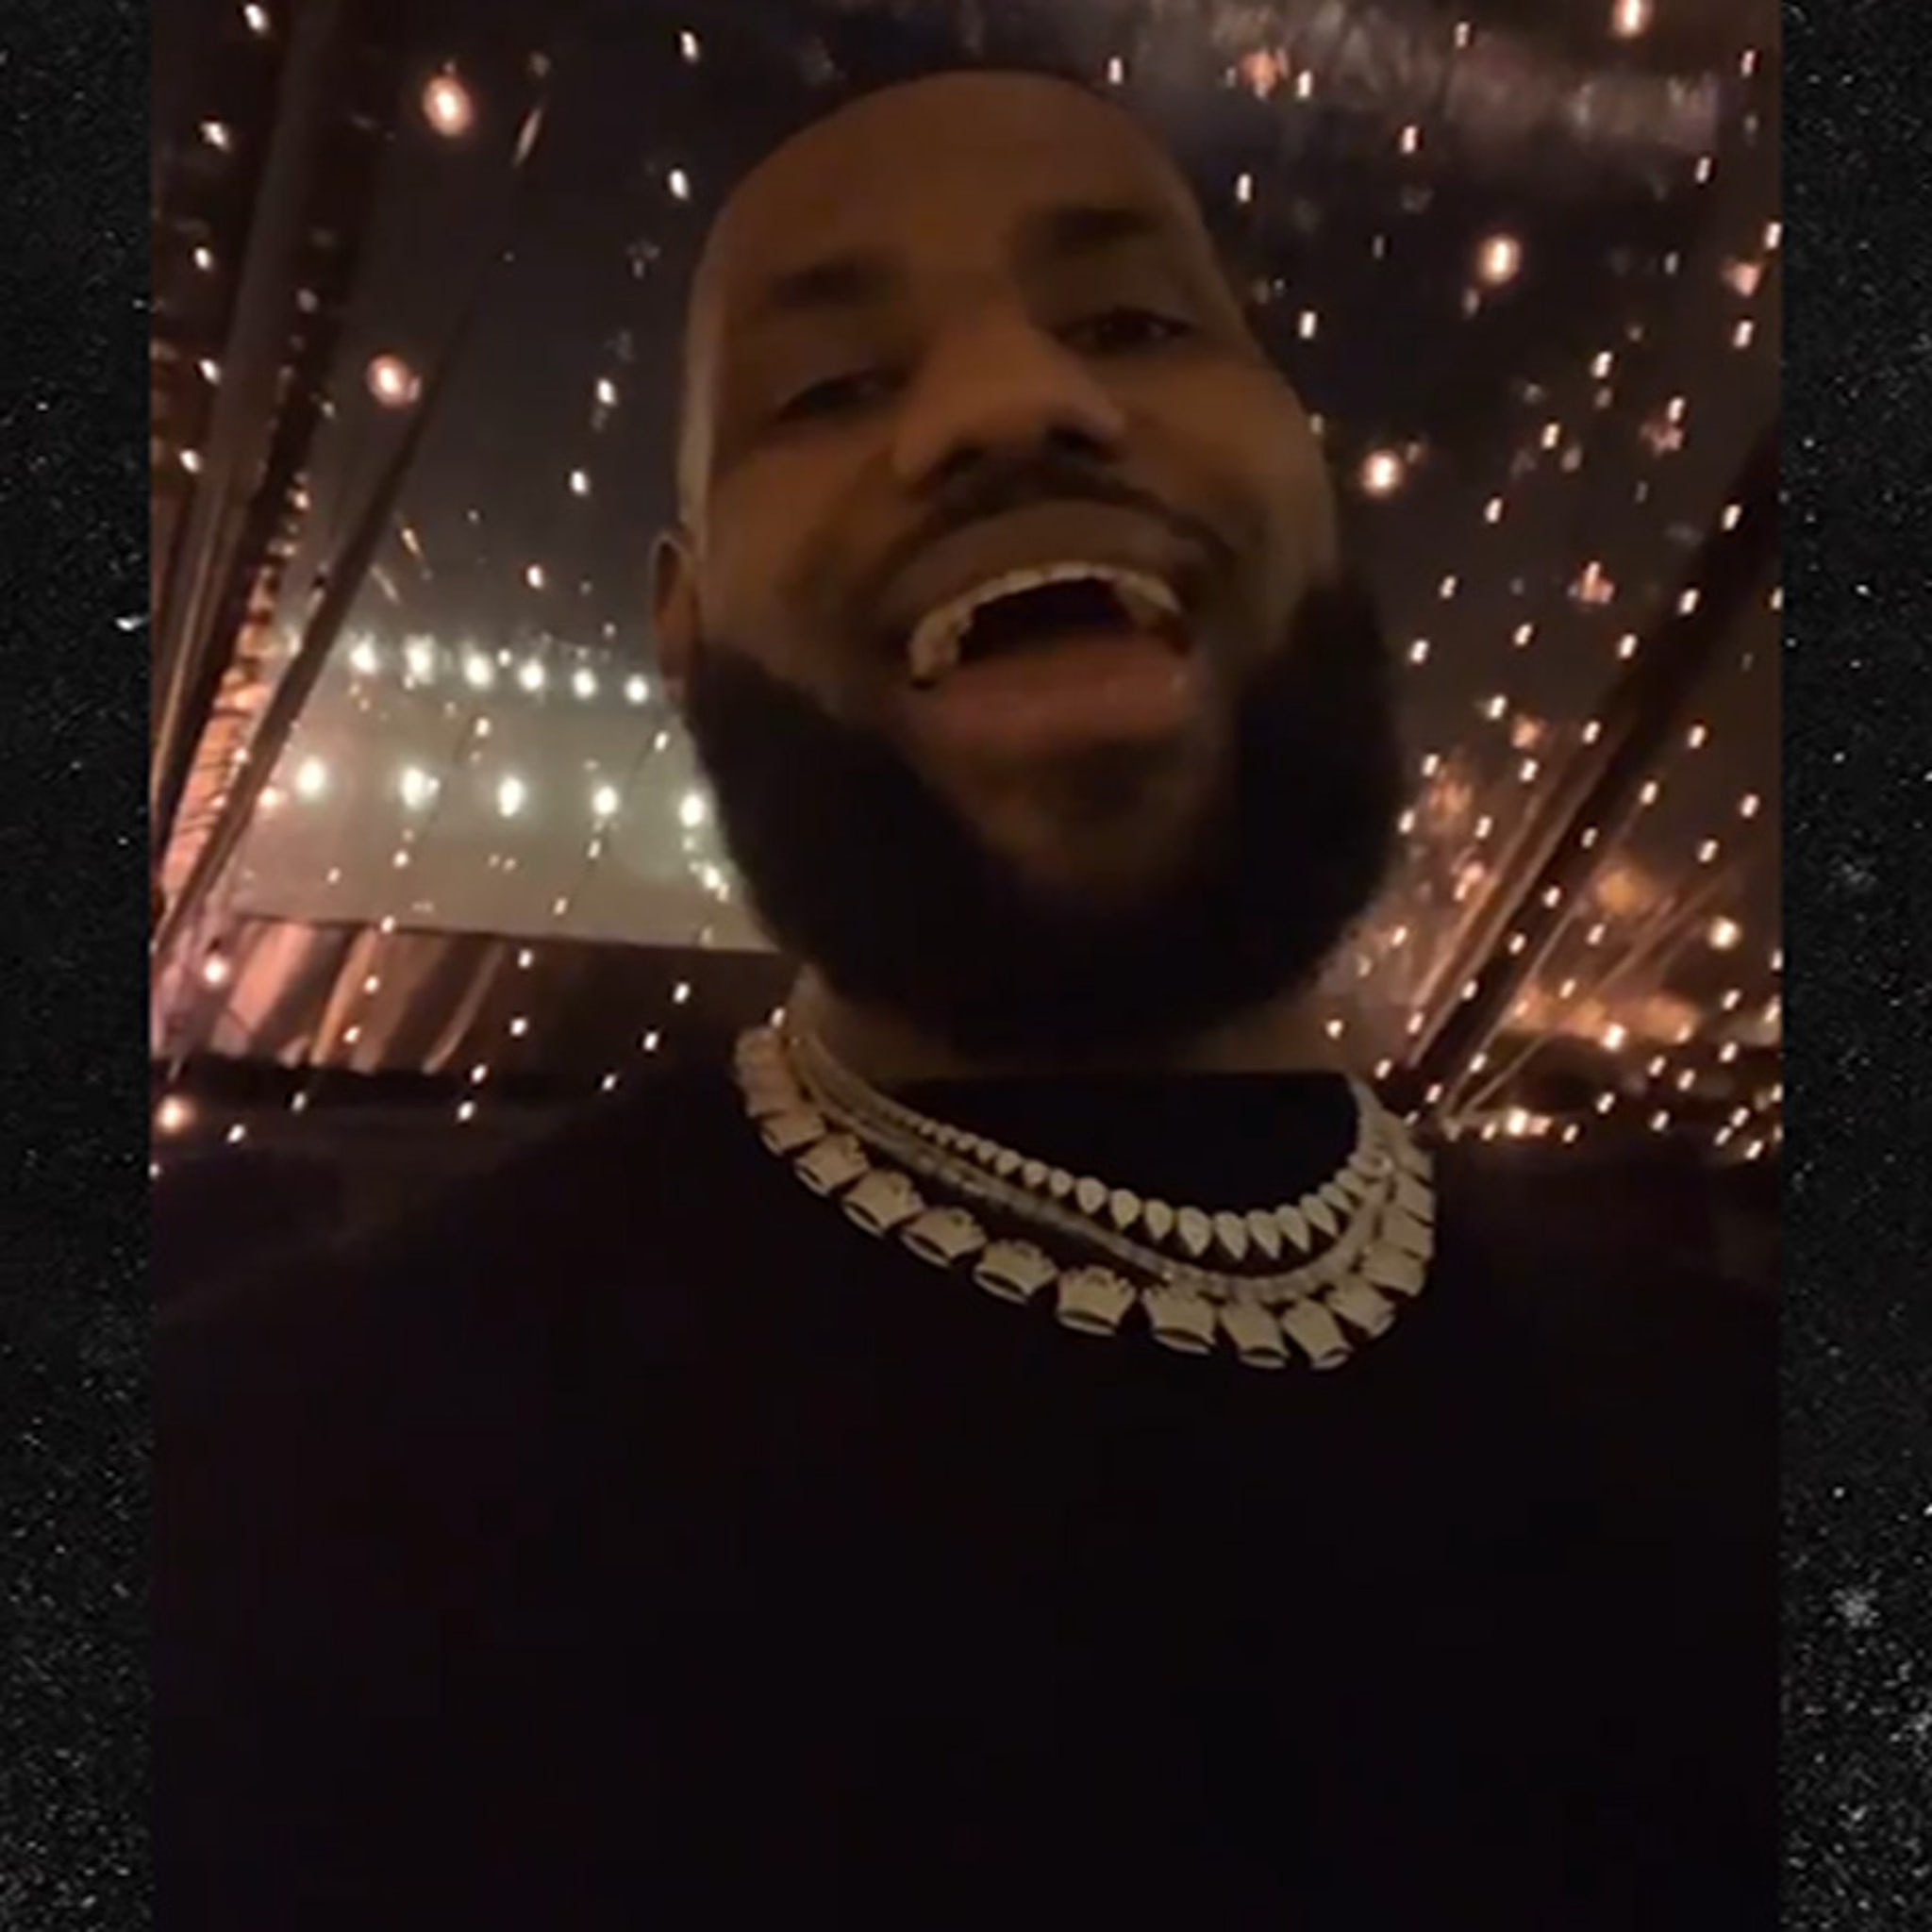 Lakers' LeBron James Posts Cryptic IG Story Quoting Jay-Z amid